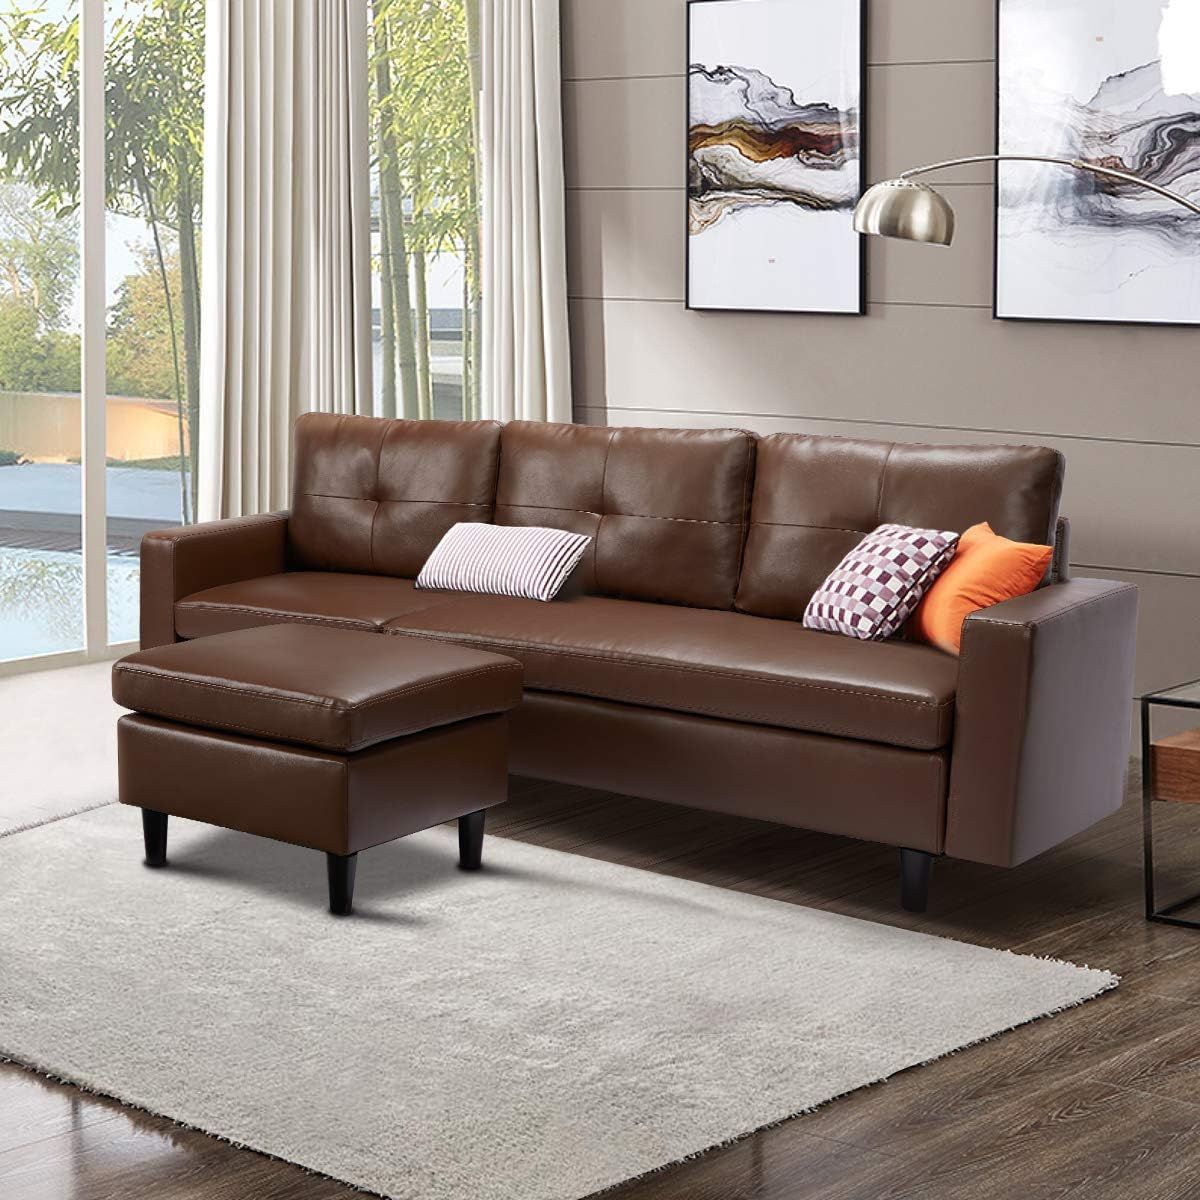 Faux Leather Sofas Inside Popular Esright Faux Leather Sectional Sofa Convertible Couch Brown Leather L (View 15 of 15)